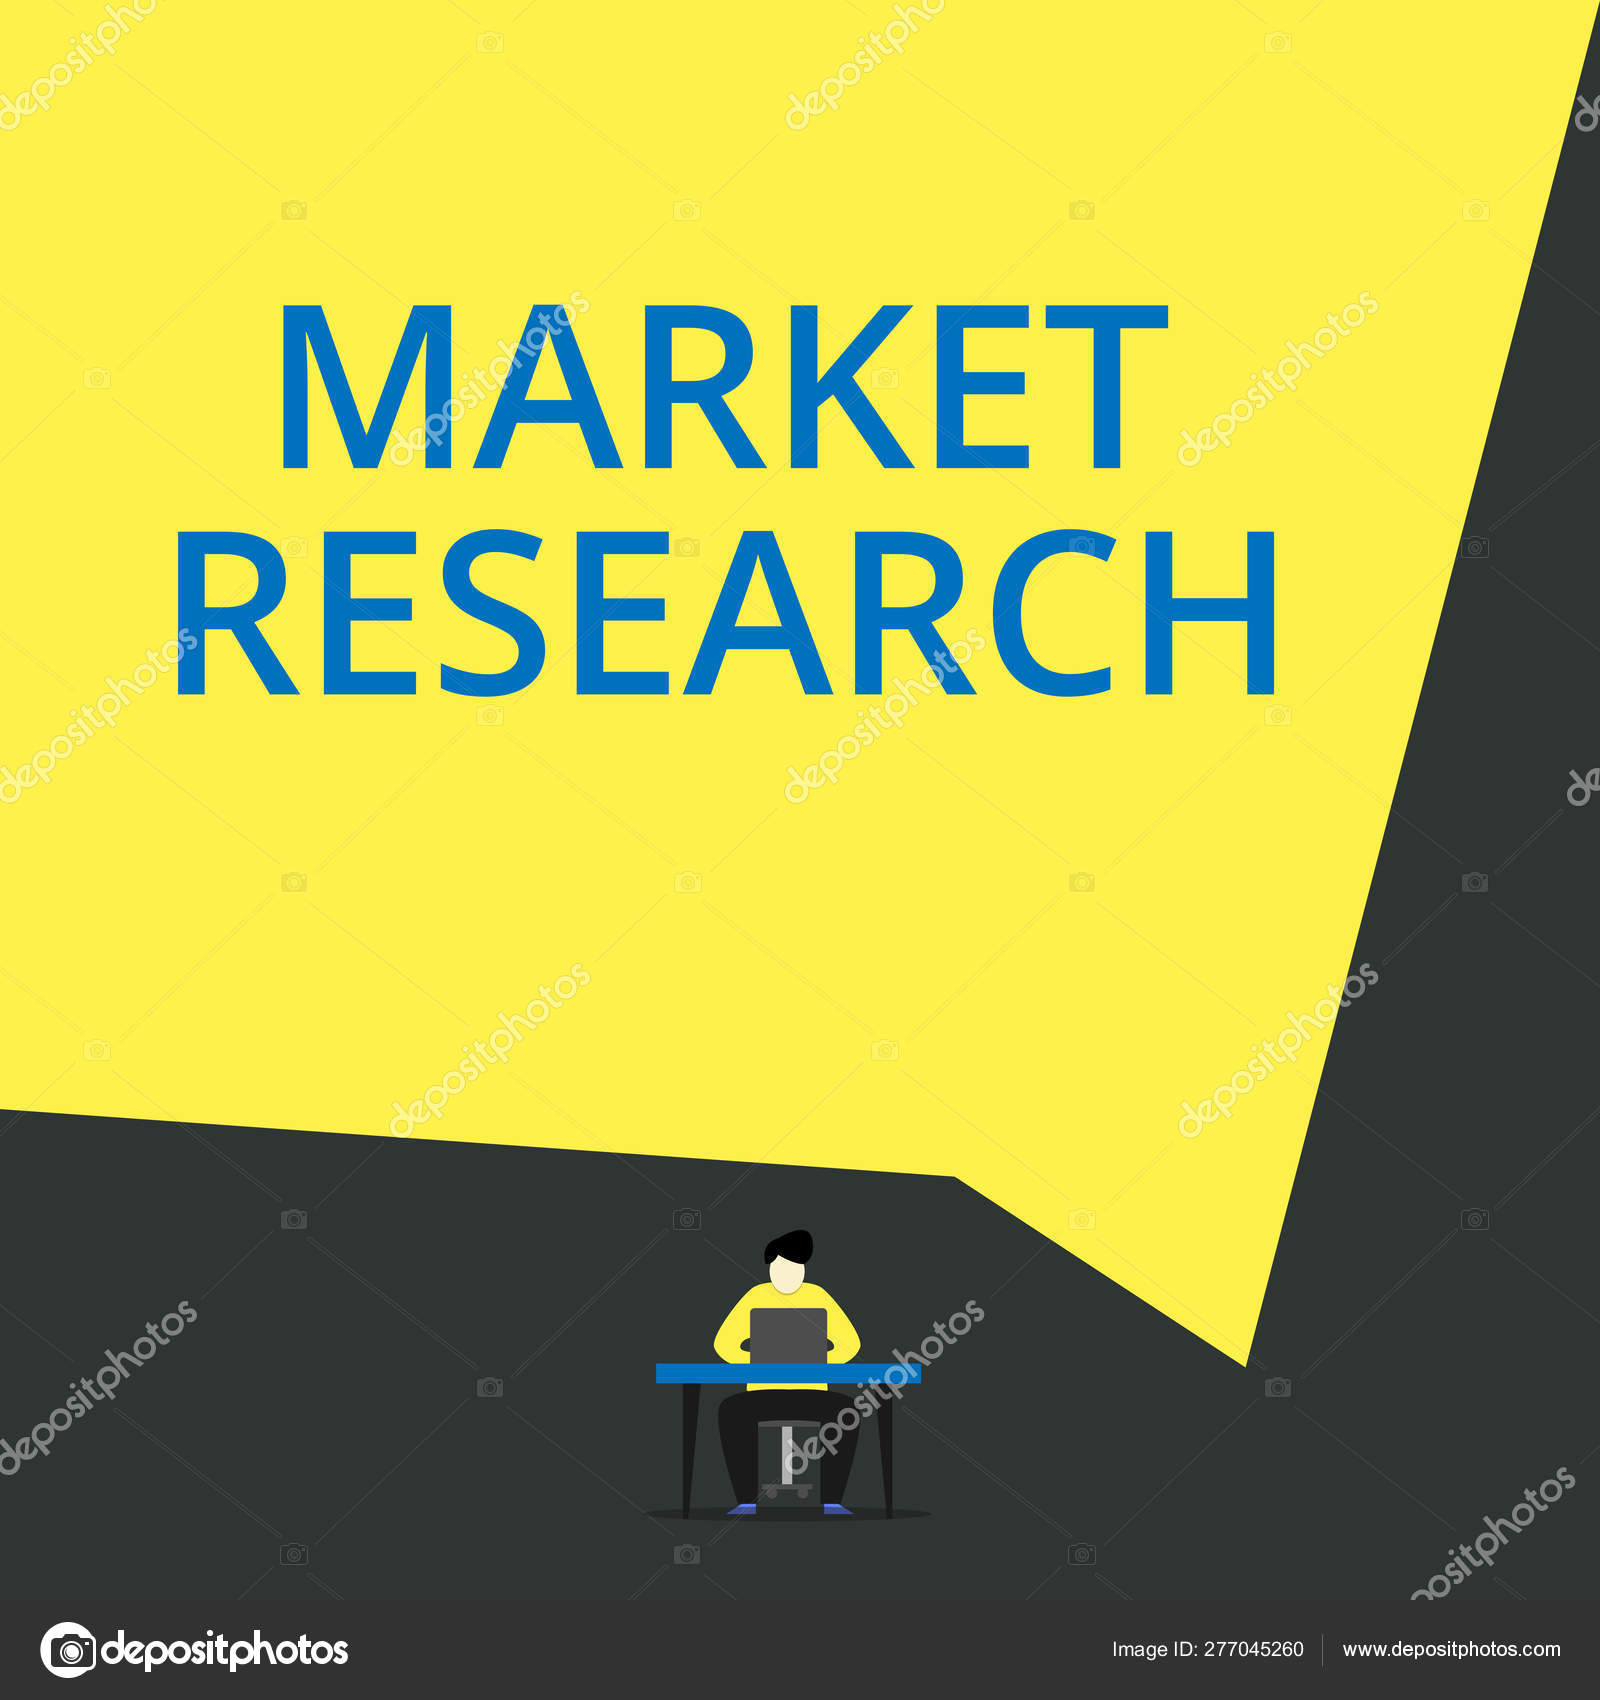 Handwriting Text Market Research Concept Meaning The Acttion Of